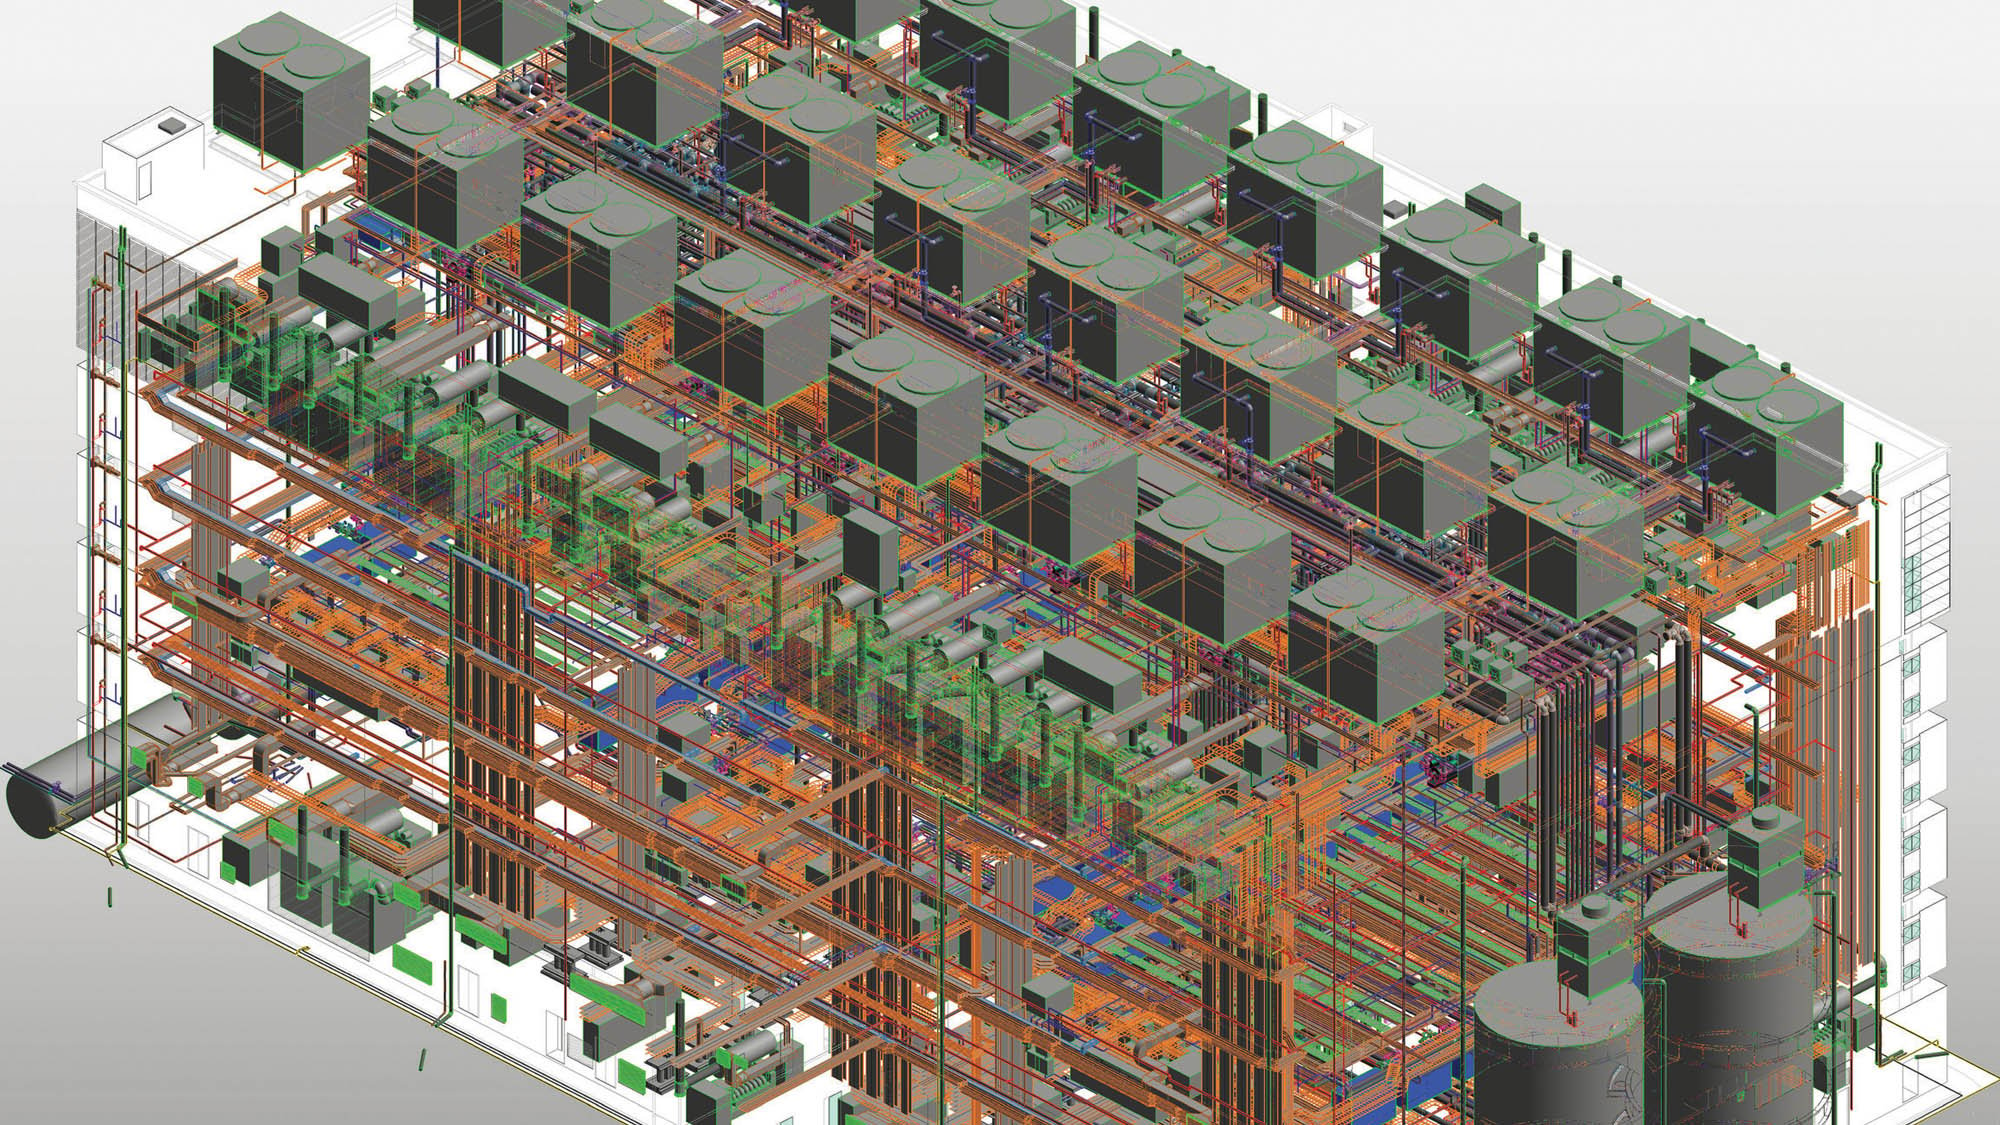 A fully built BIM model was formulated for FDC2 throughout the whole design life cycle